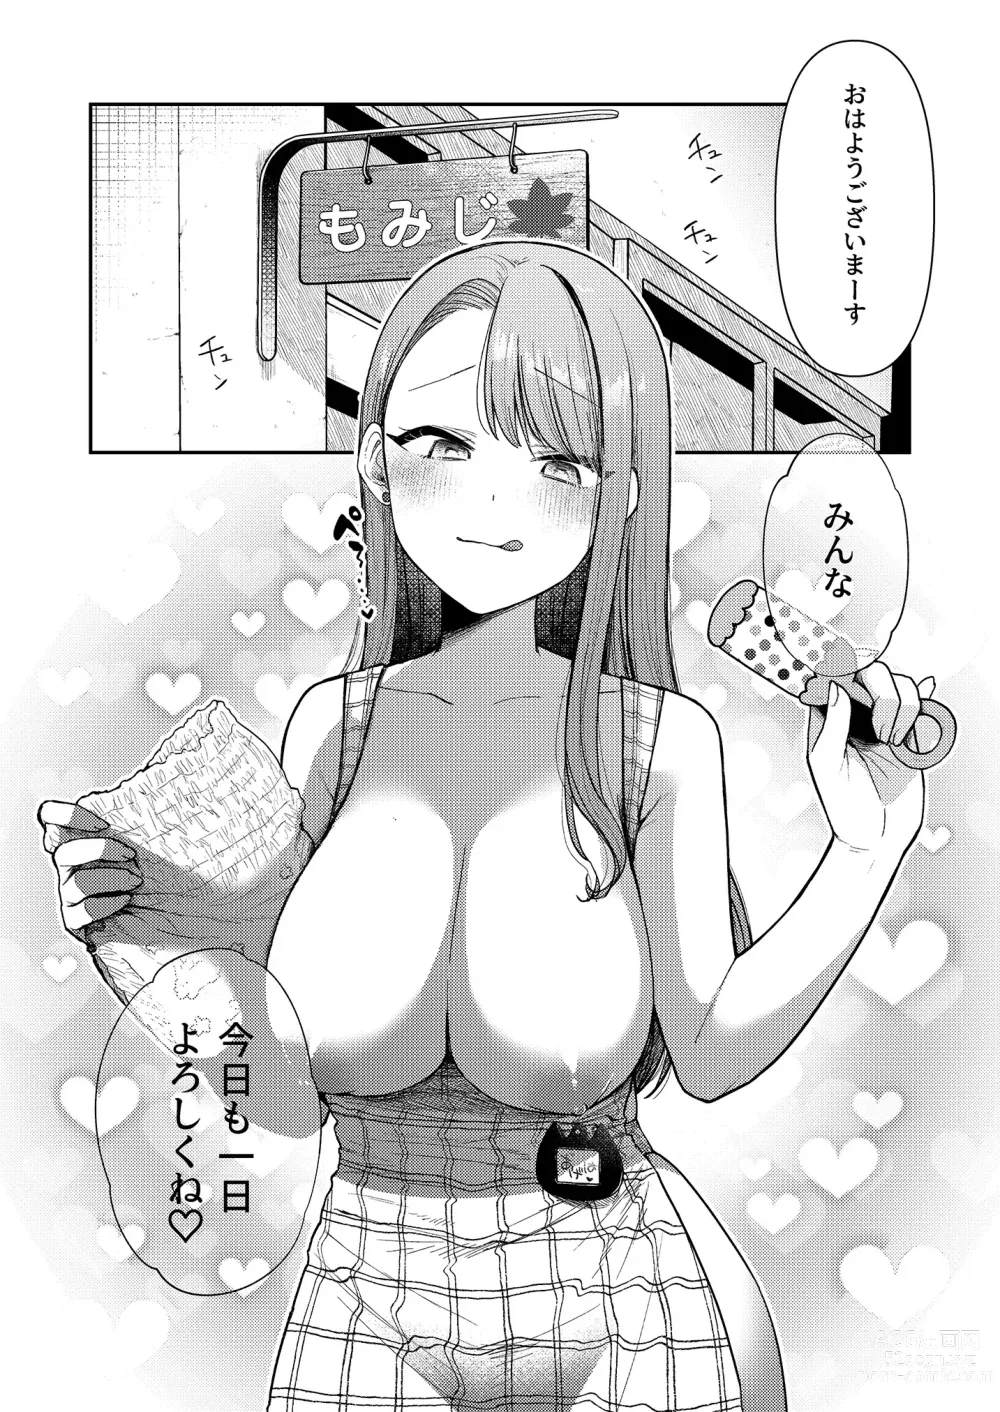 Page 21 of doujinshi Ageha tente to issho